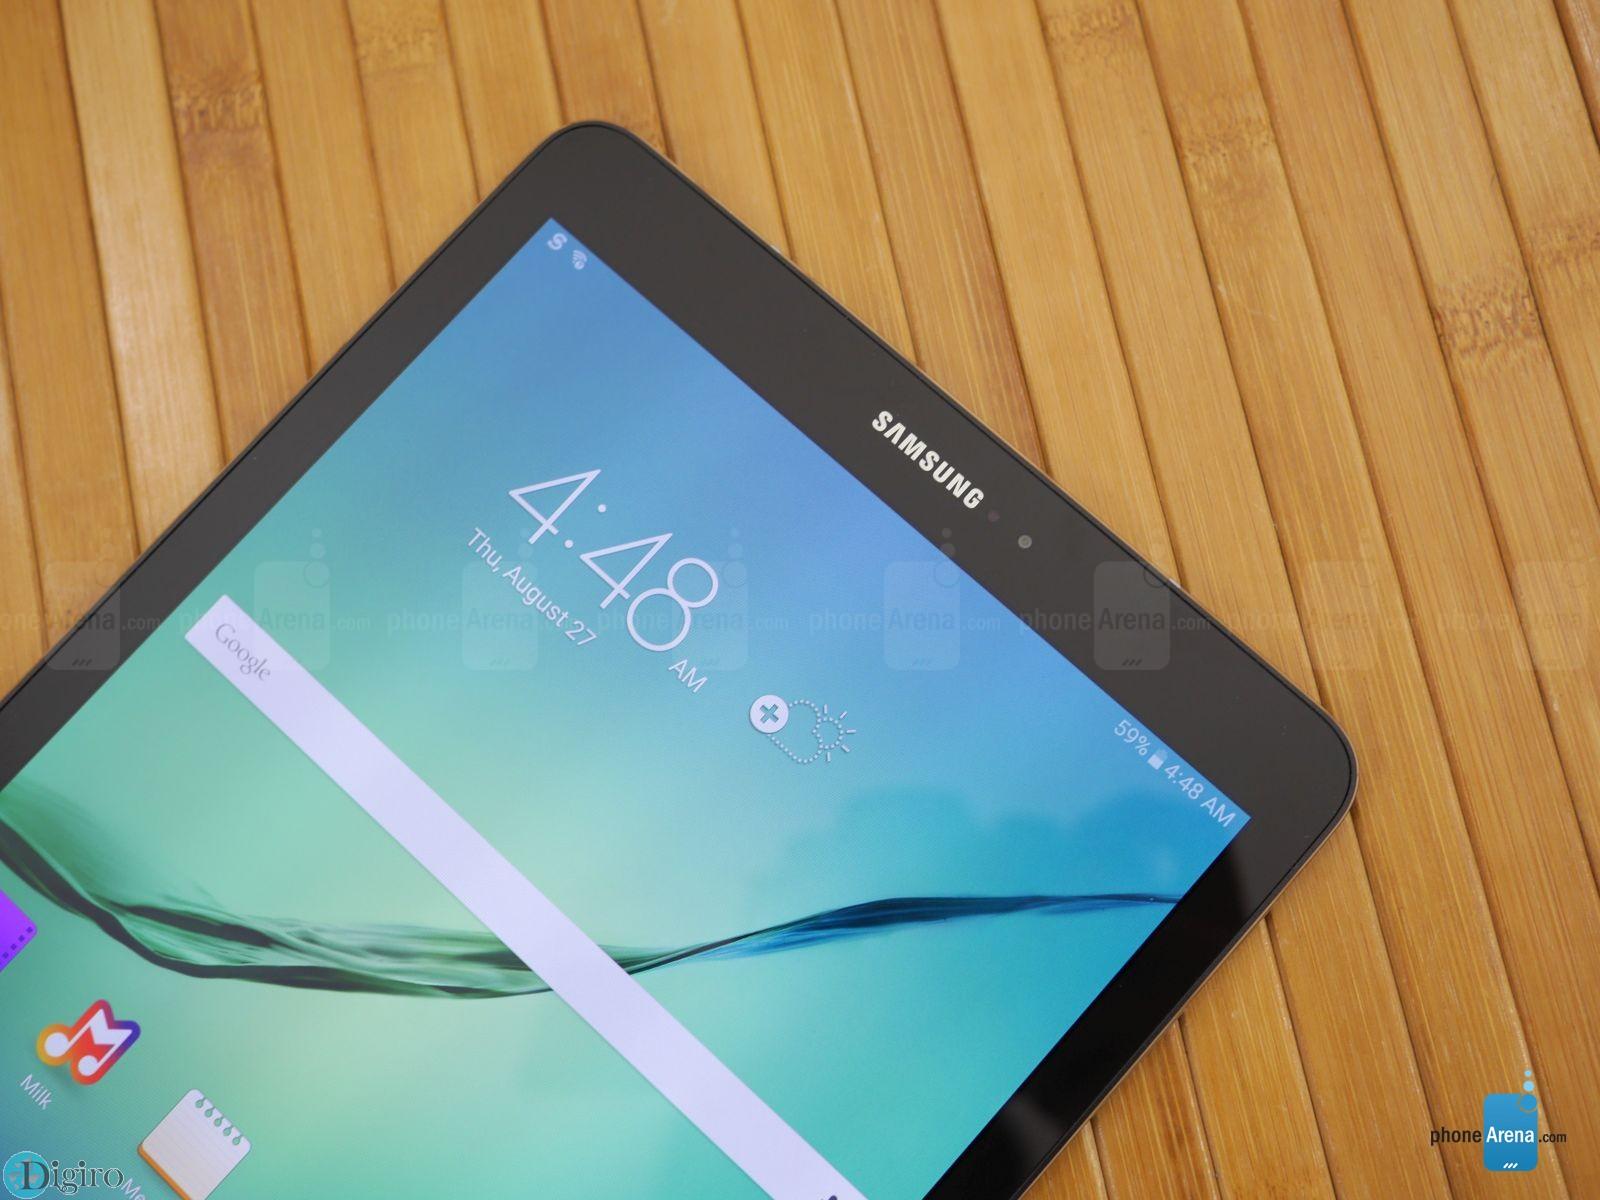 Samsung-Galaxy-Tab-S2-9.7-inch-hands-on--amp-unboxing (6)